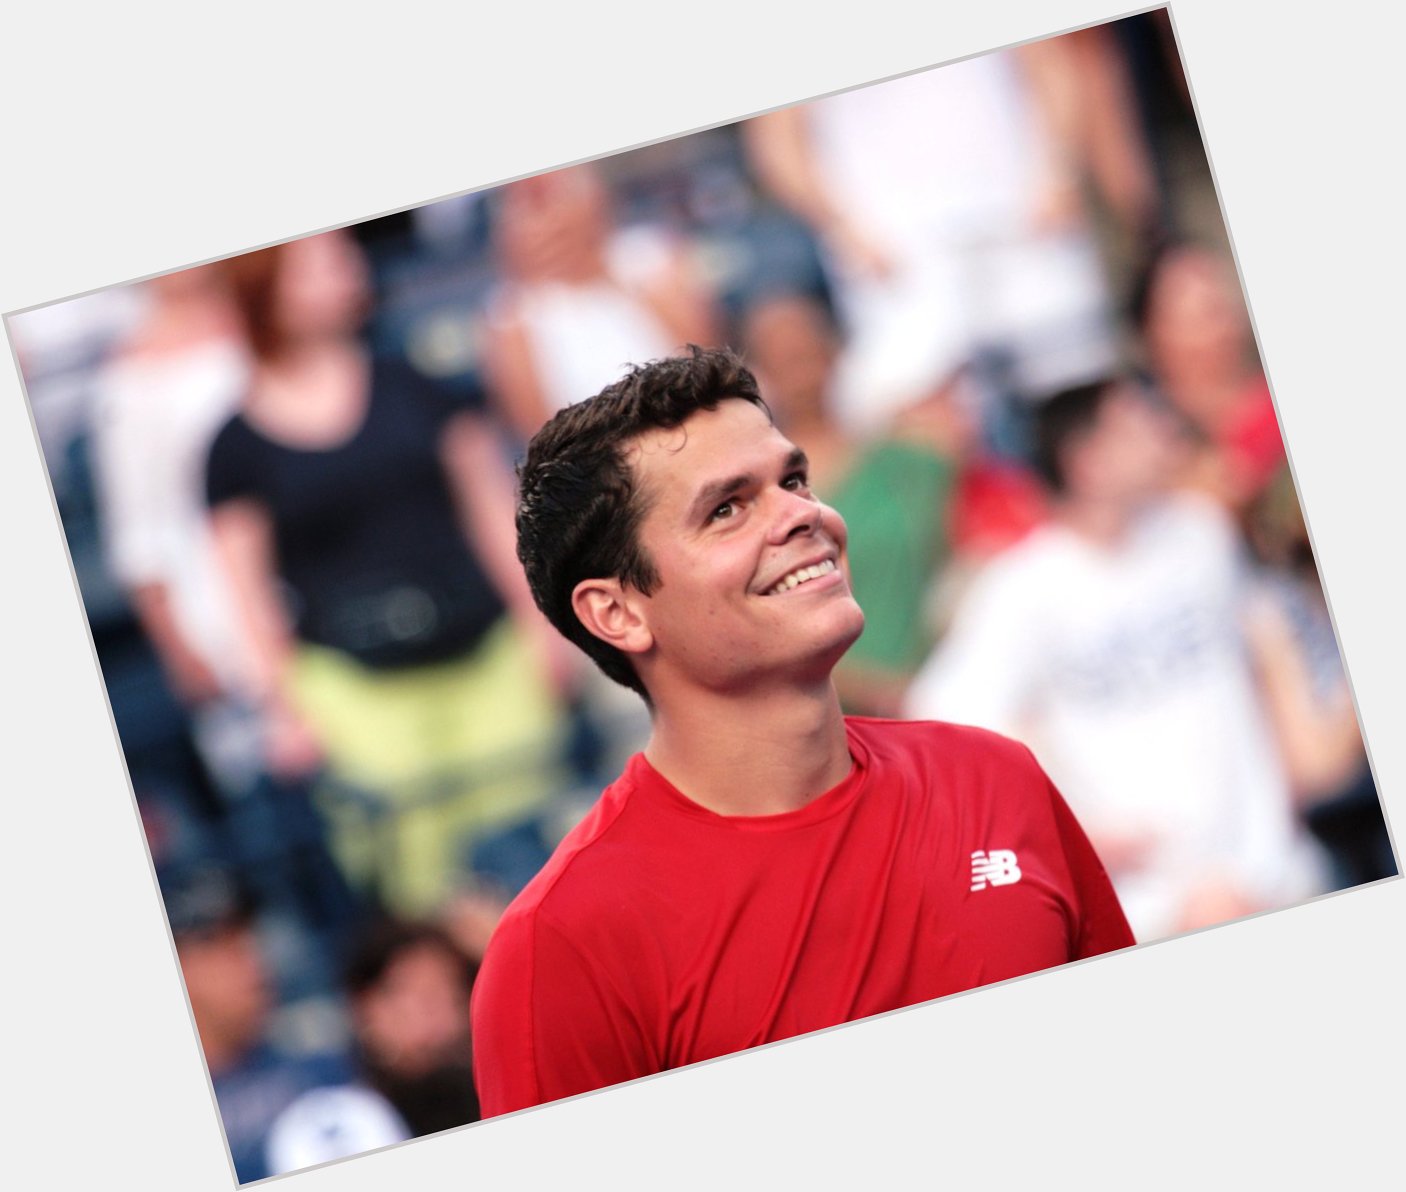 Happy 29th birthday to Milos Raonic who when healthy is still a major threat on the ATP Tour. 